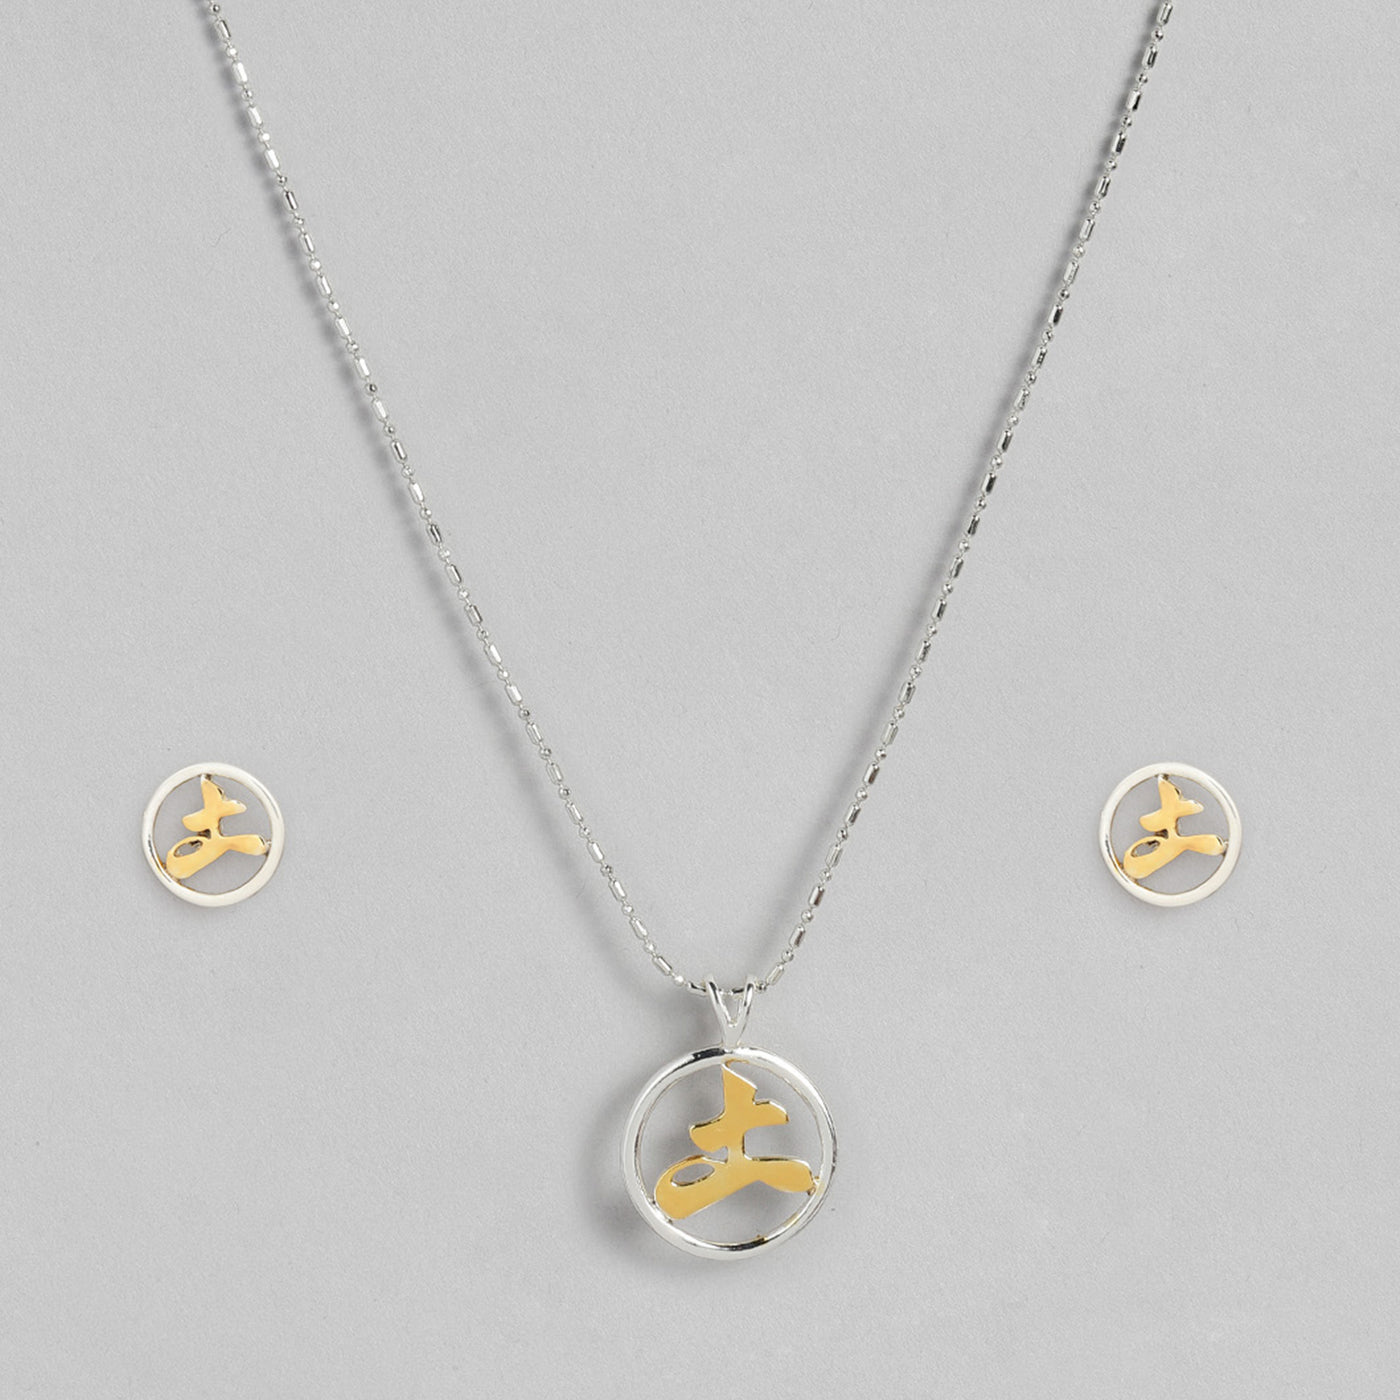 Estele Gold & Rhodium Plated Chinese Astrological "Earth" Symbol Necklace Set for Women